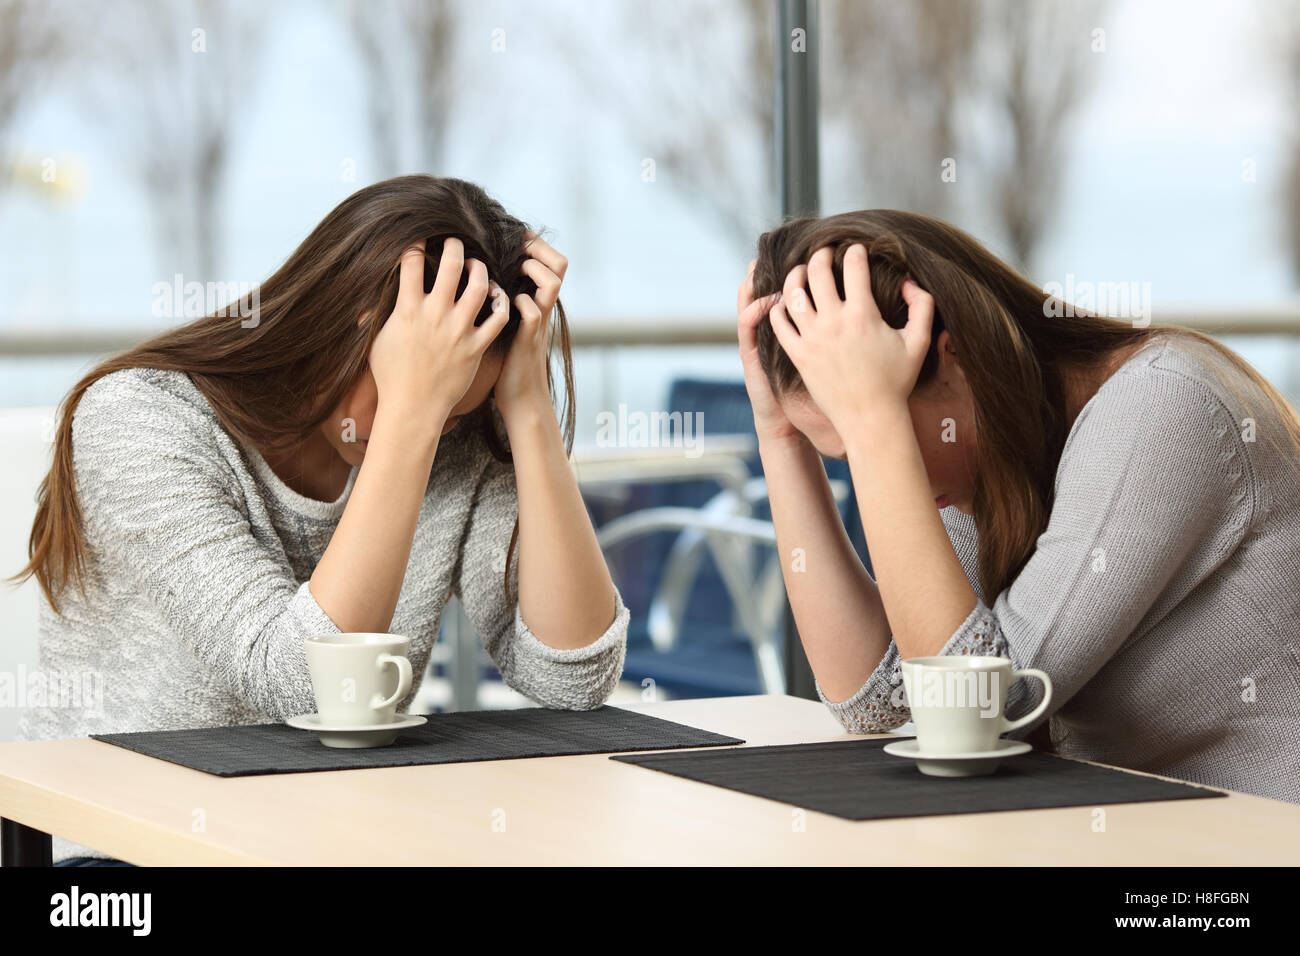 Two desperate sad girls crying with hands over head in a bar with a window with a winter background Stock Photo